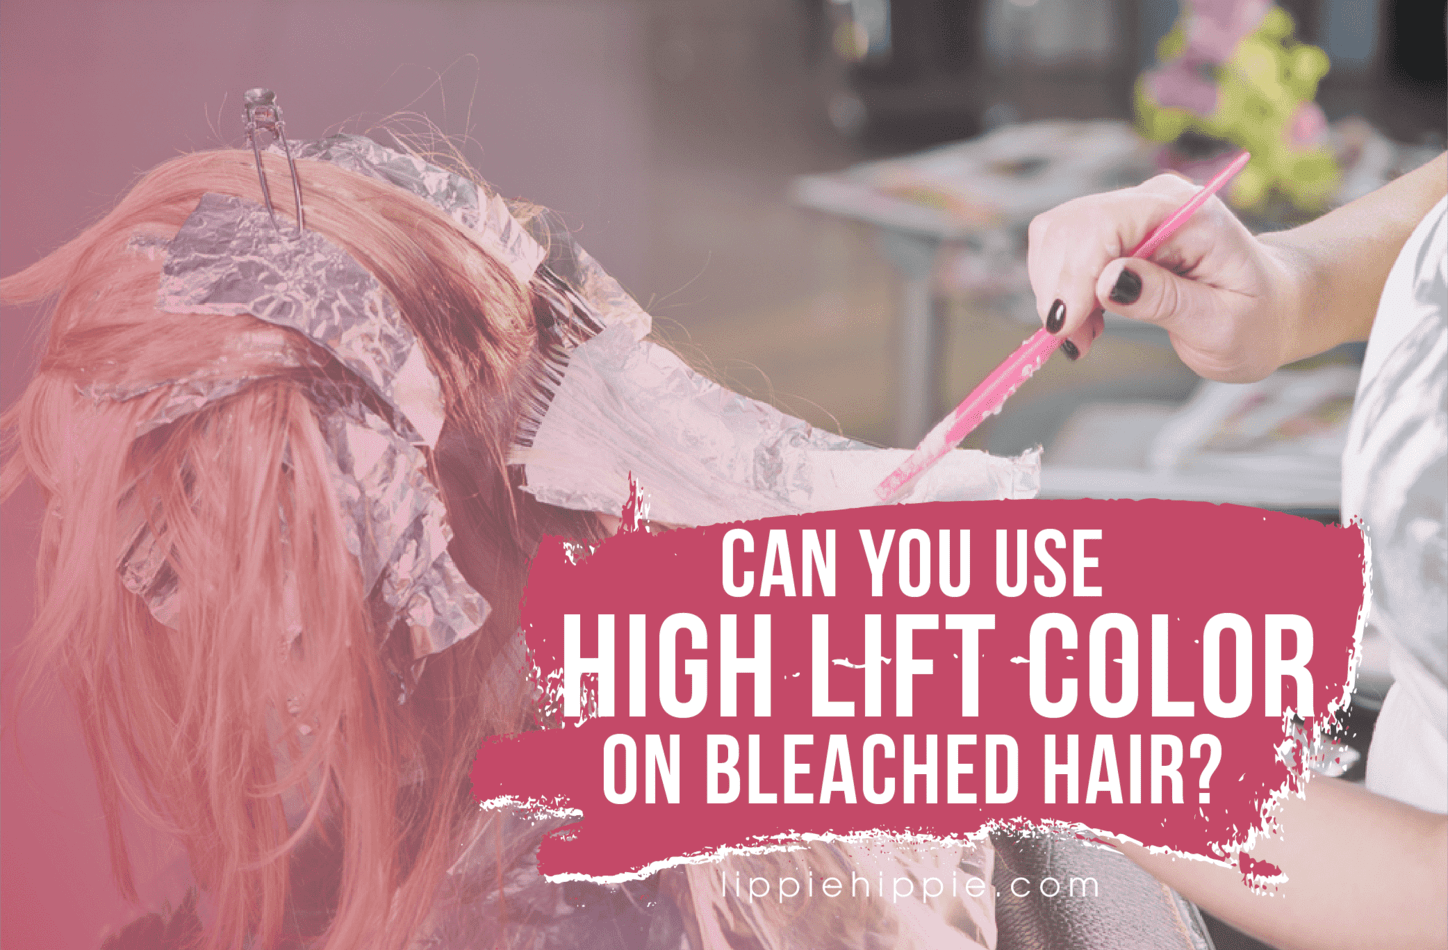 Use High Lift Color on Bleached Hair